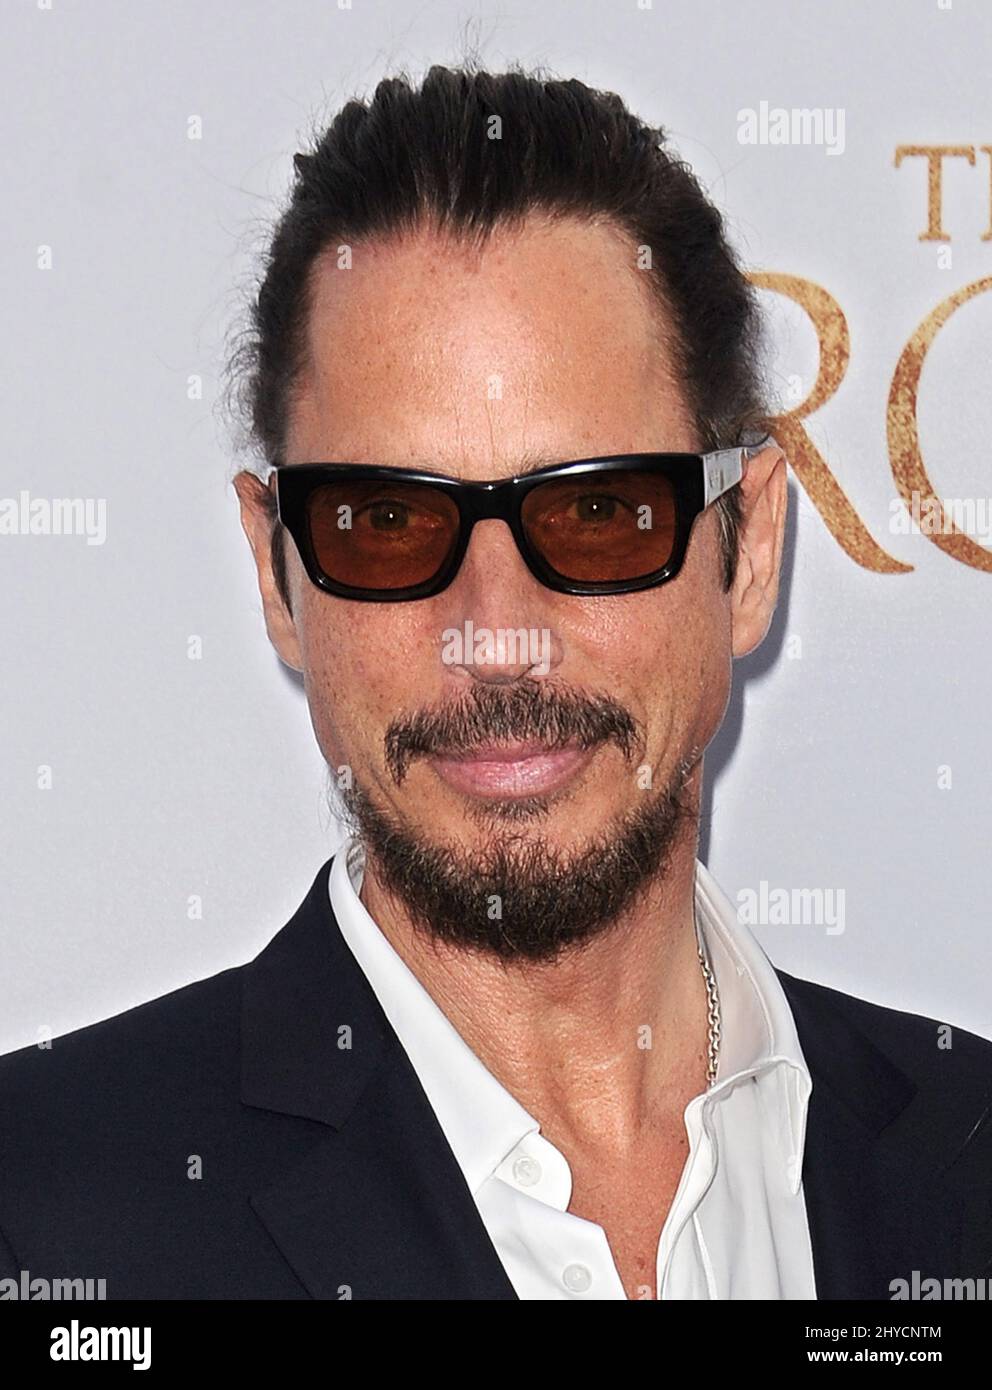 Chris Cornell has died aged 52. Chris Cornell attending the premiere of The Promise, held at TCL Chinese Theatre, in Los Angeles, California Stock Photo